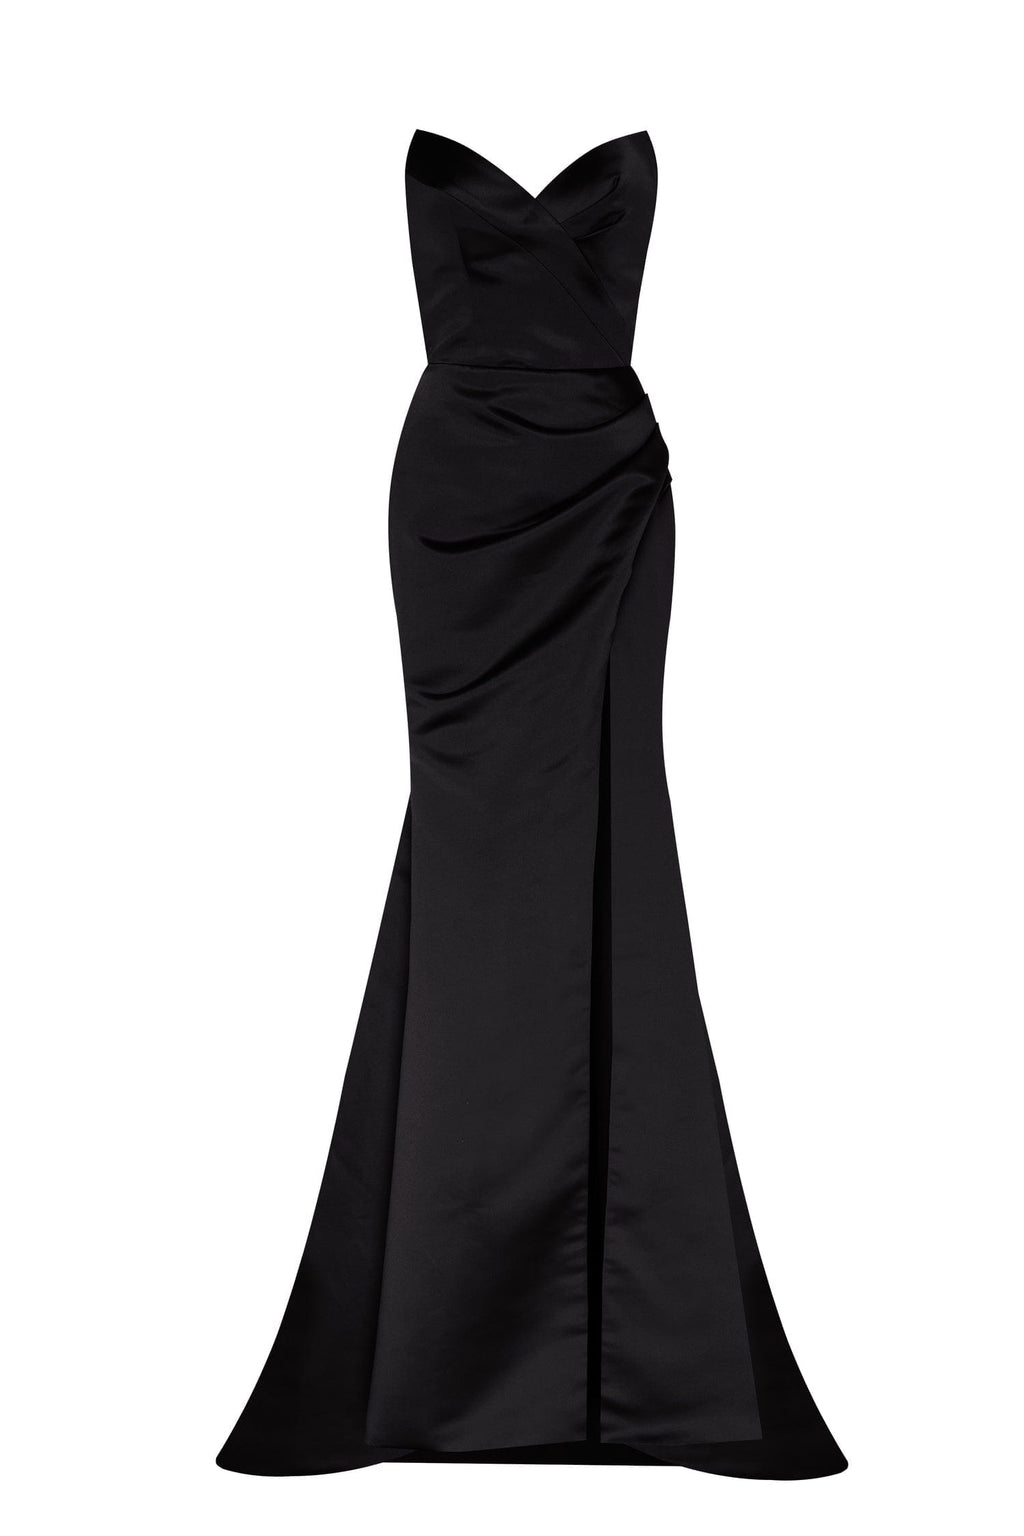 Black Tulle Sleeve Beaded Prom Party Gown Dress – Sultan Dress